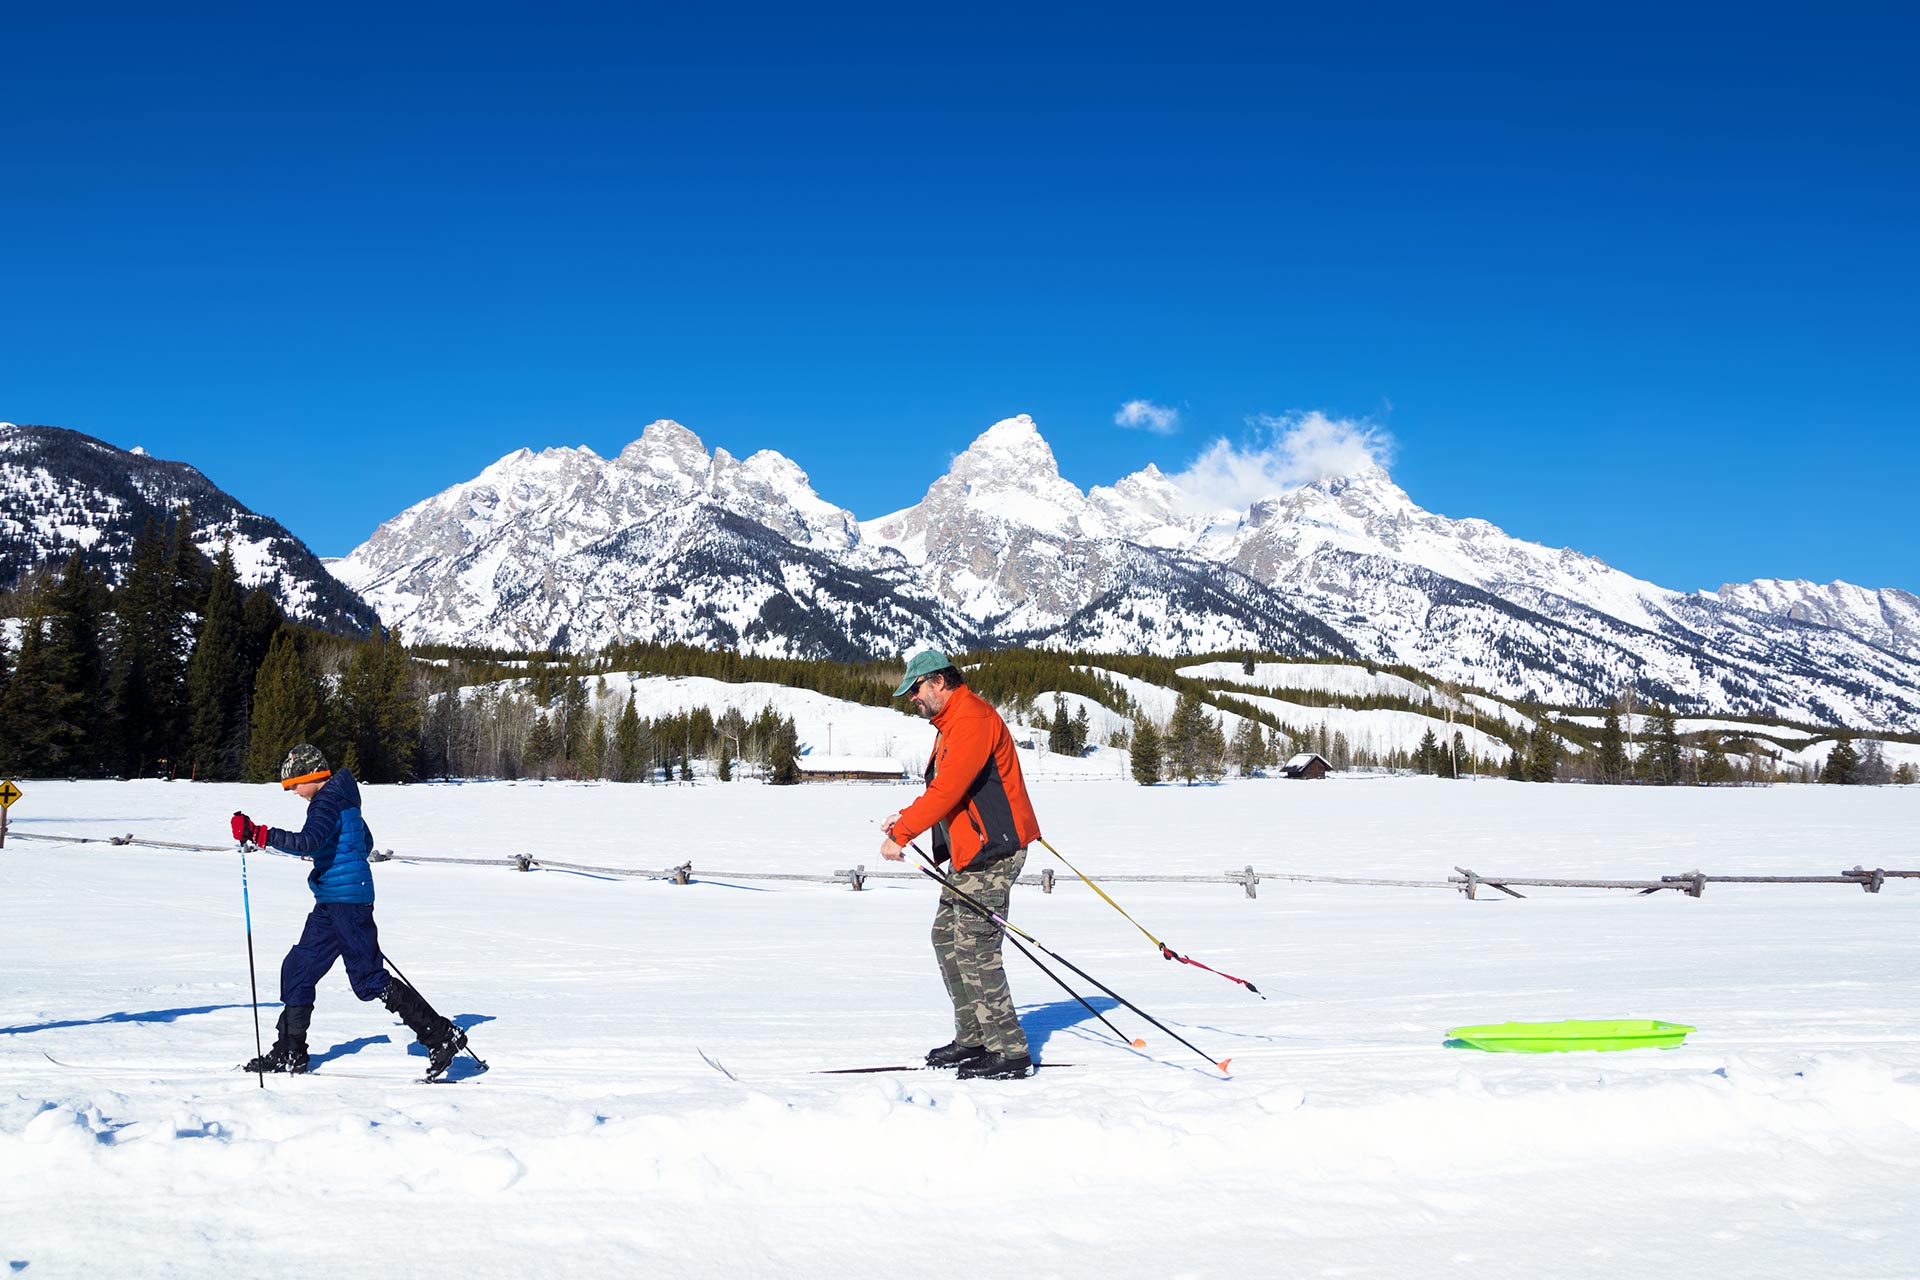 Cross-country skiing in Grand Teton National Park in Wyoming, USA.